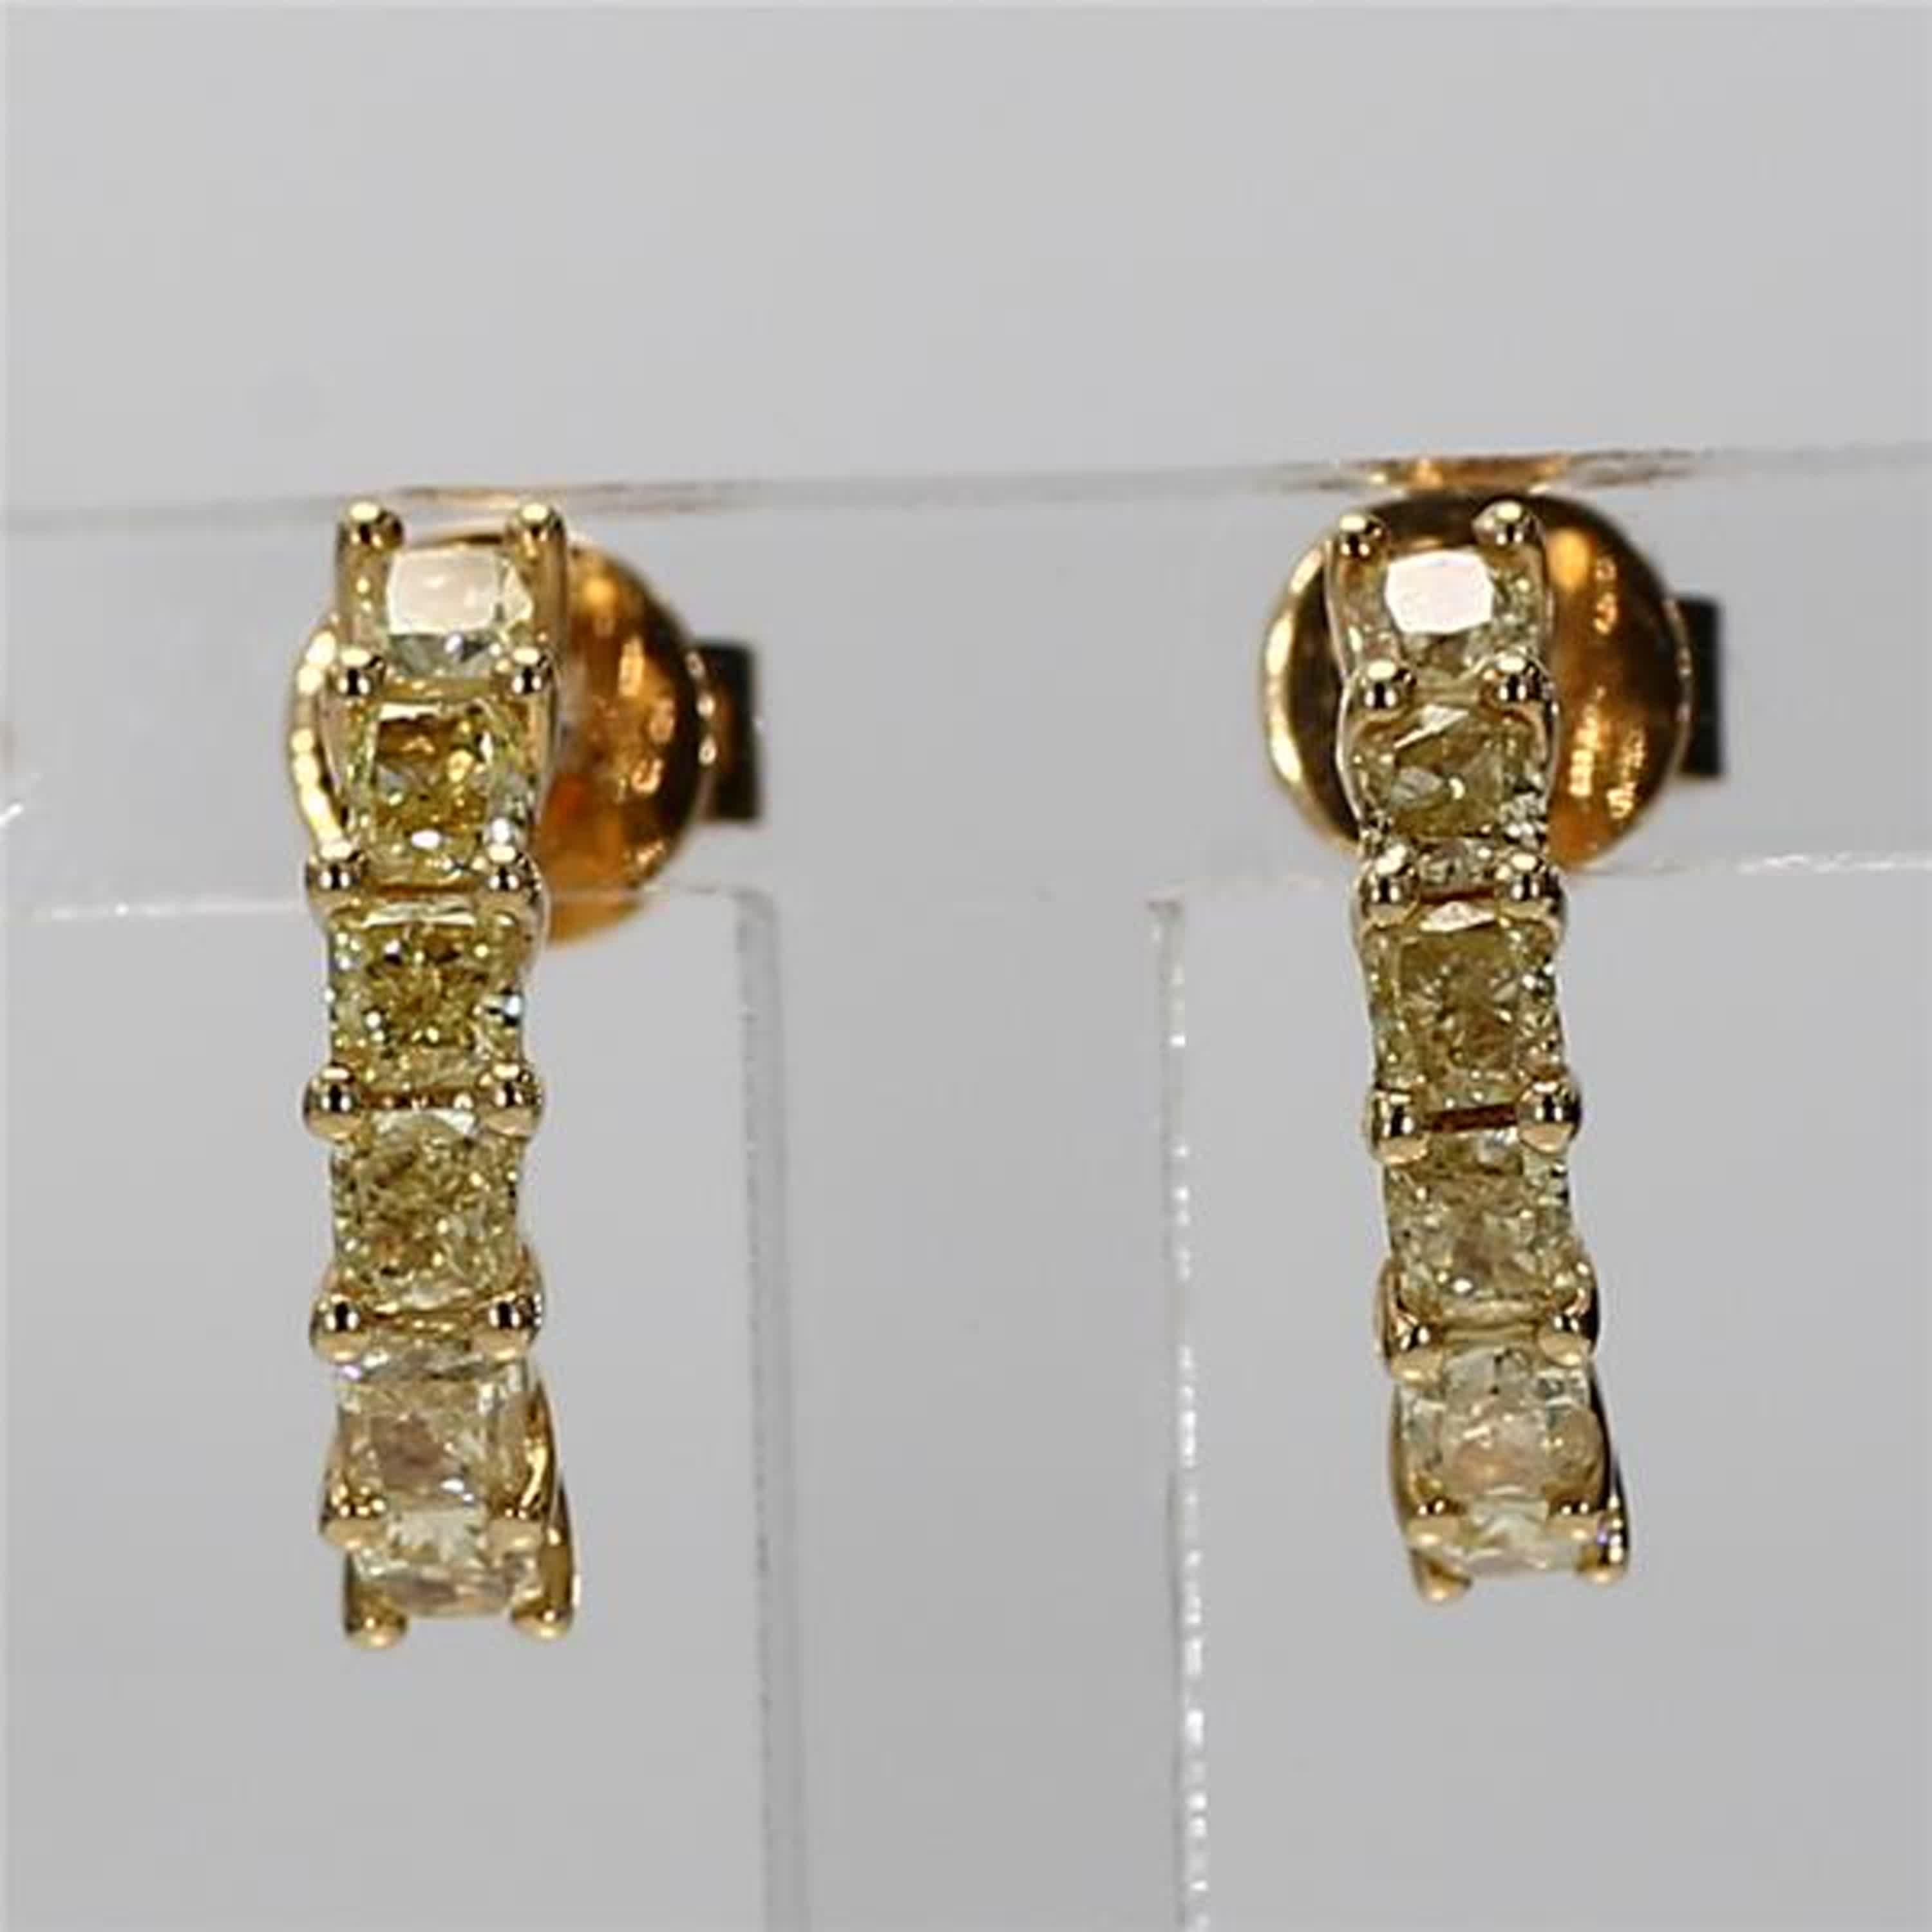 RareGemWorld's classic diamond earrings. Mounted in a beautiful 18K Yellow Gold setting with natural cushion cut yellow diamonds. These earrings are guaranteed to impress and enhance your personal collection!

Total Weight: .82cts

Center Diamond